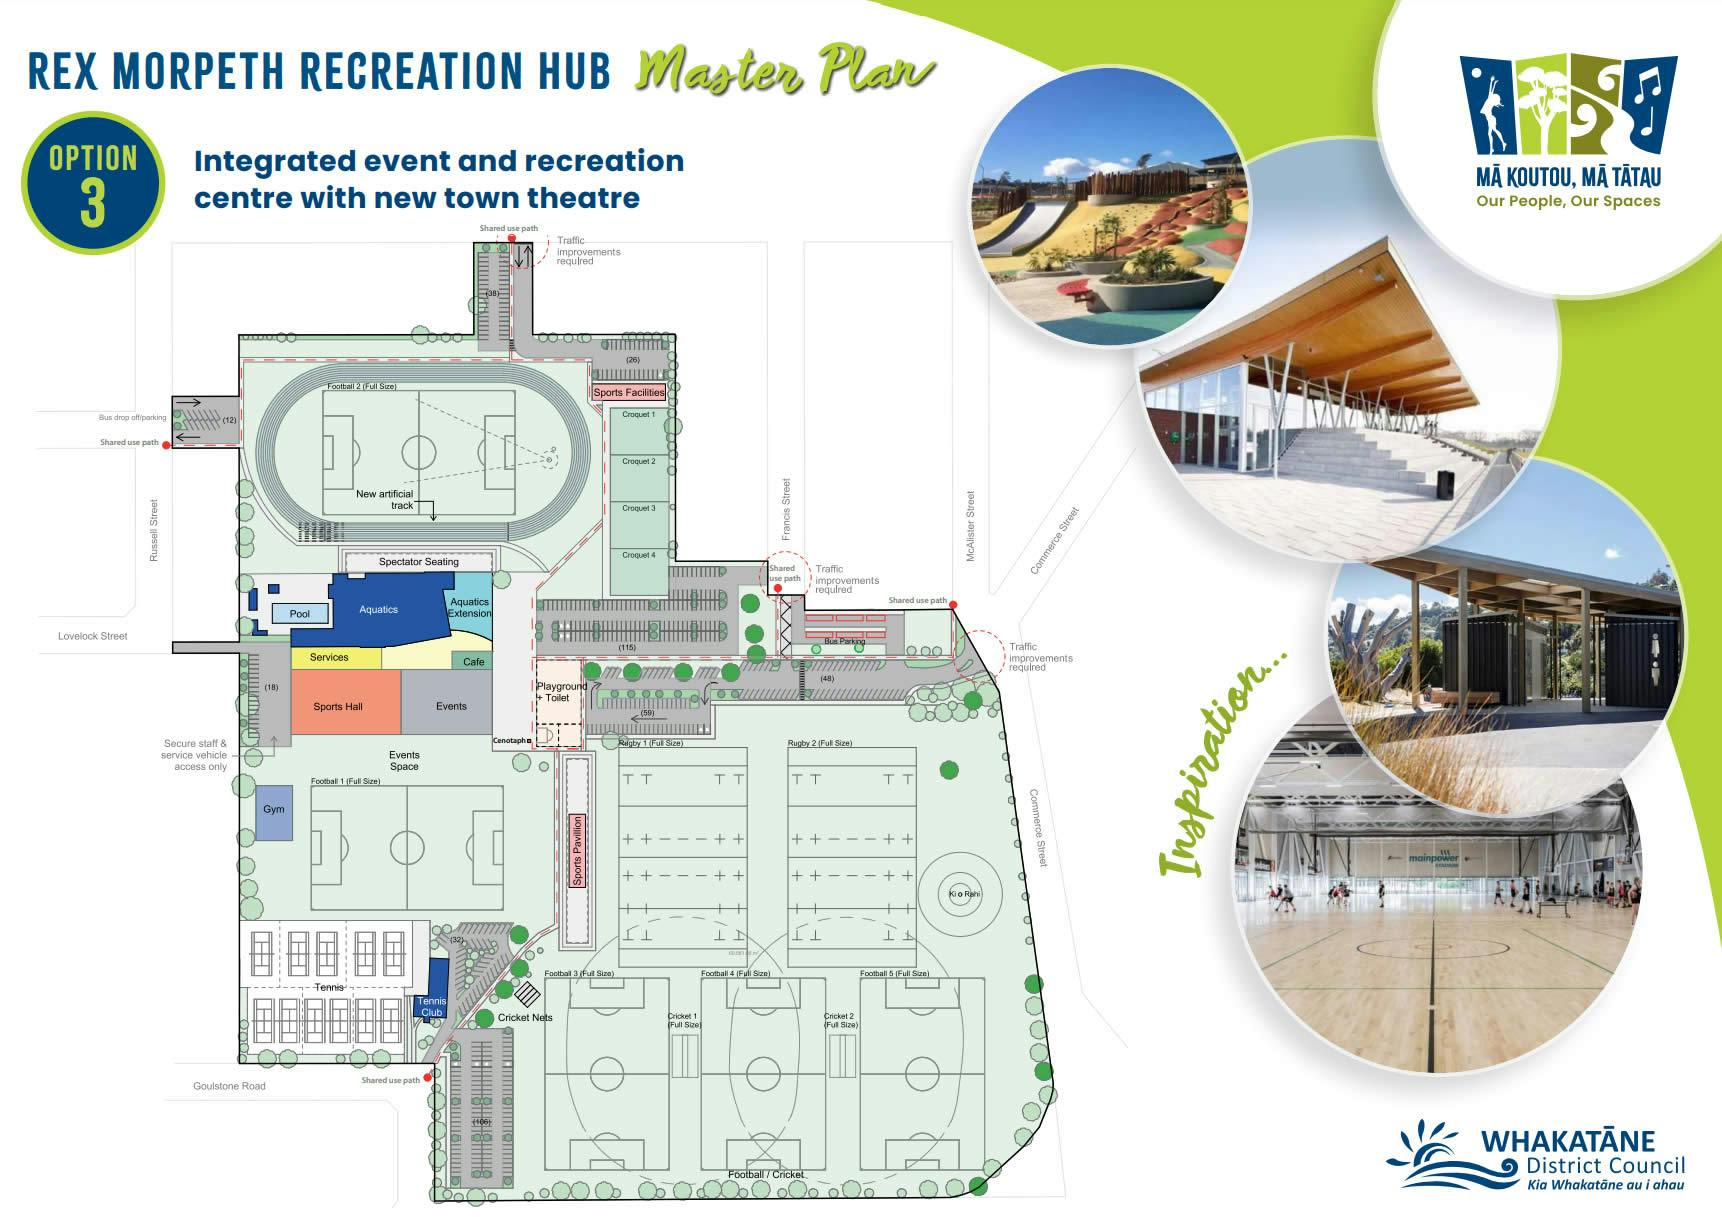 Option 3 = Integrated event and recreation centre with new town theatre